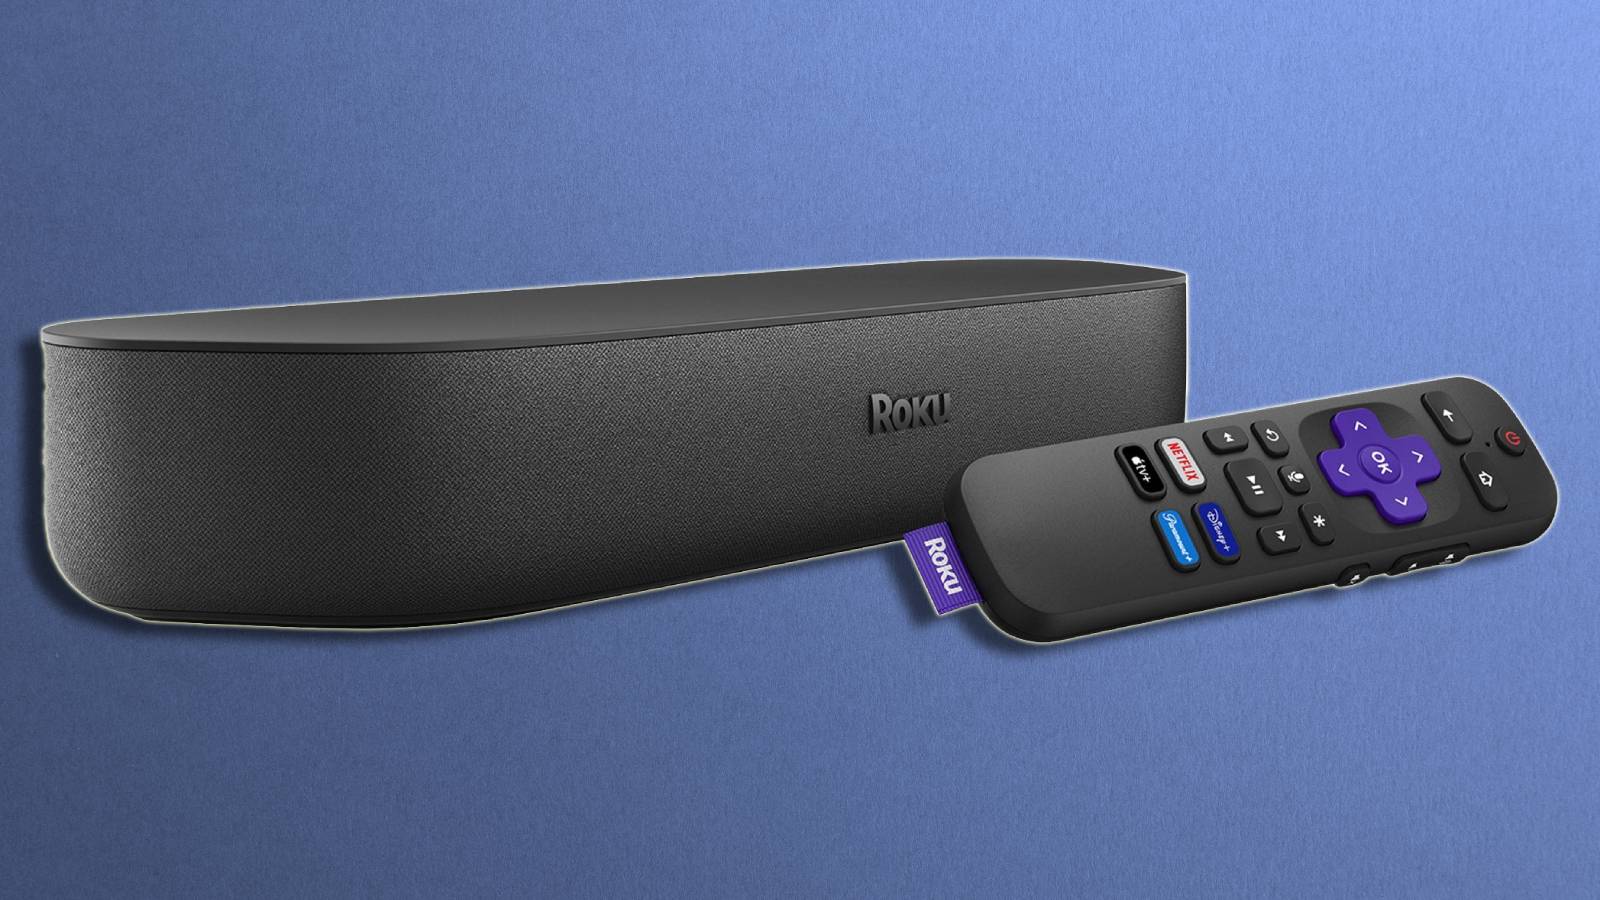 Upgrade Your Home Theater Setup for Less: Best Buy Offers 23% Off Roku Streambar